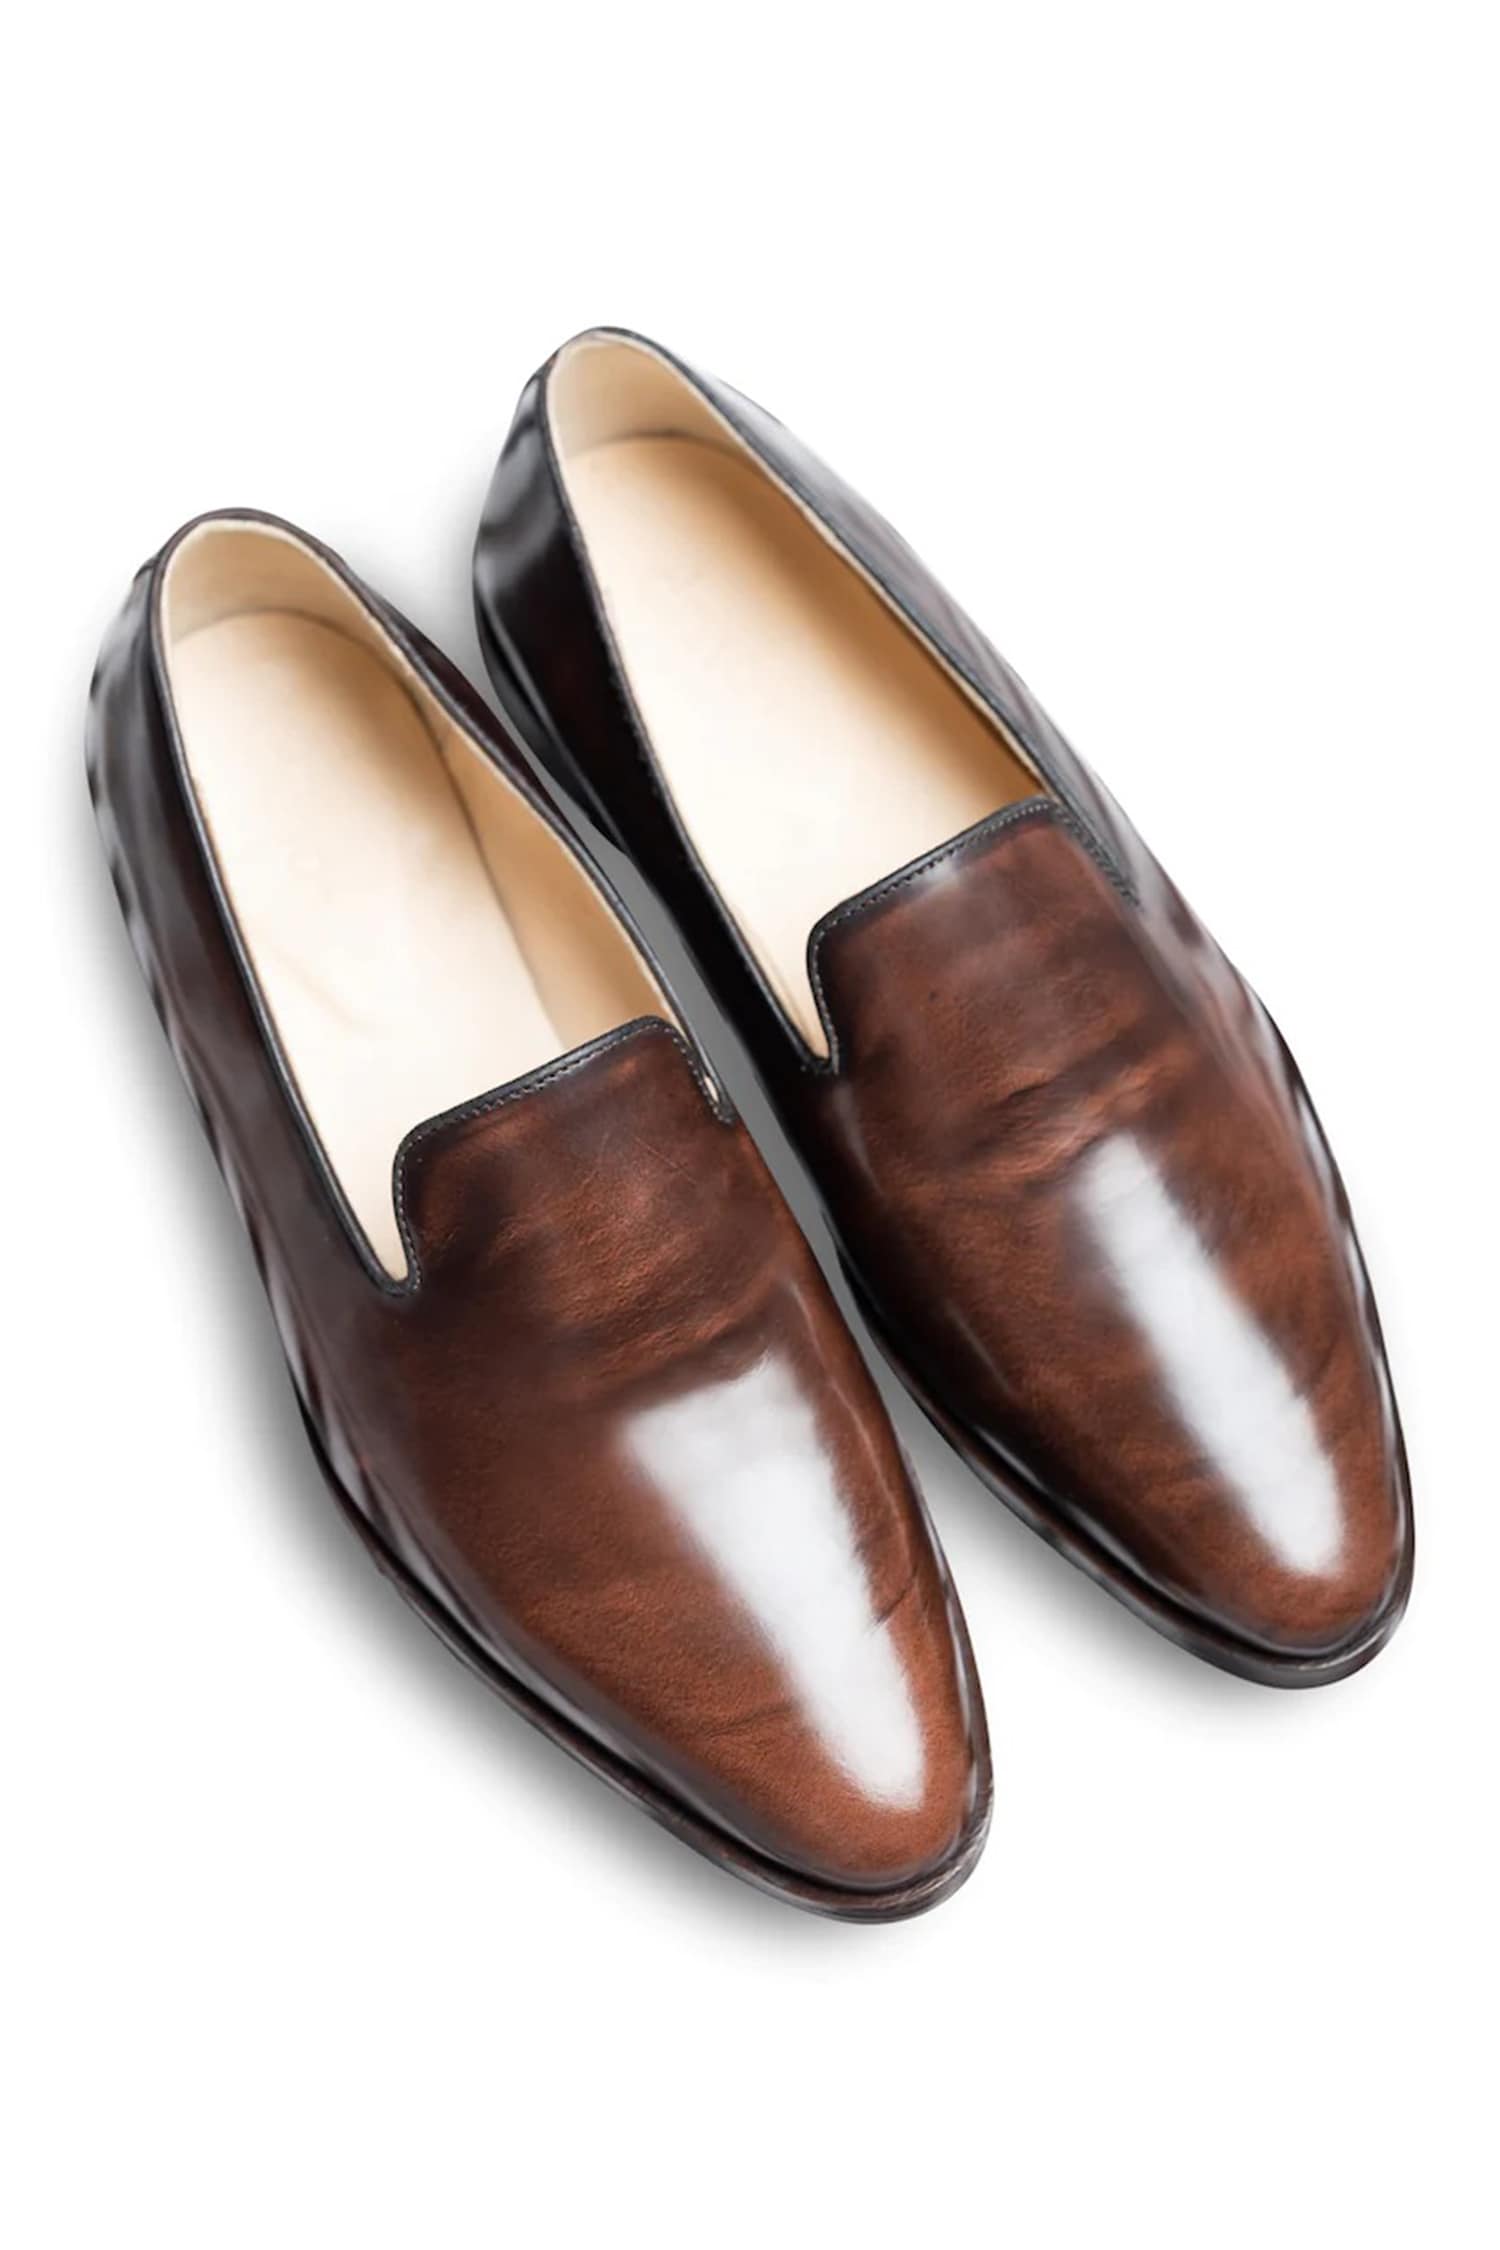 Dmodot Brown Leather Motivo Chocro Loafers